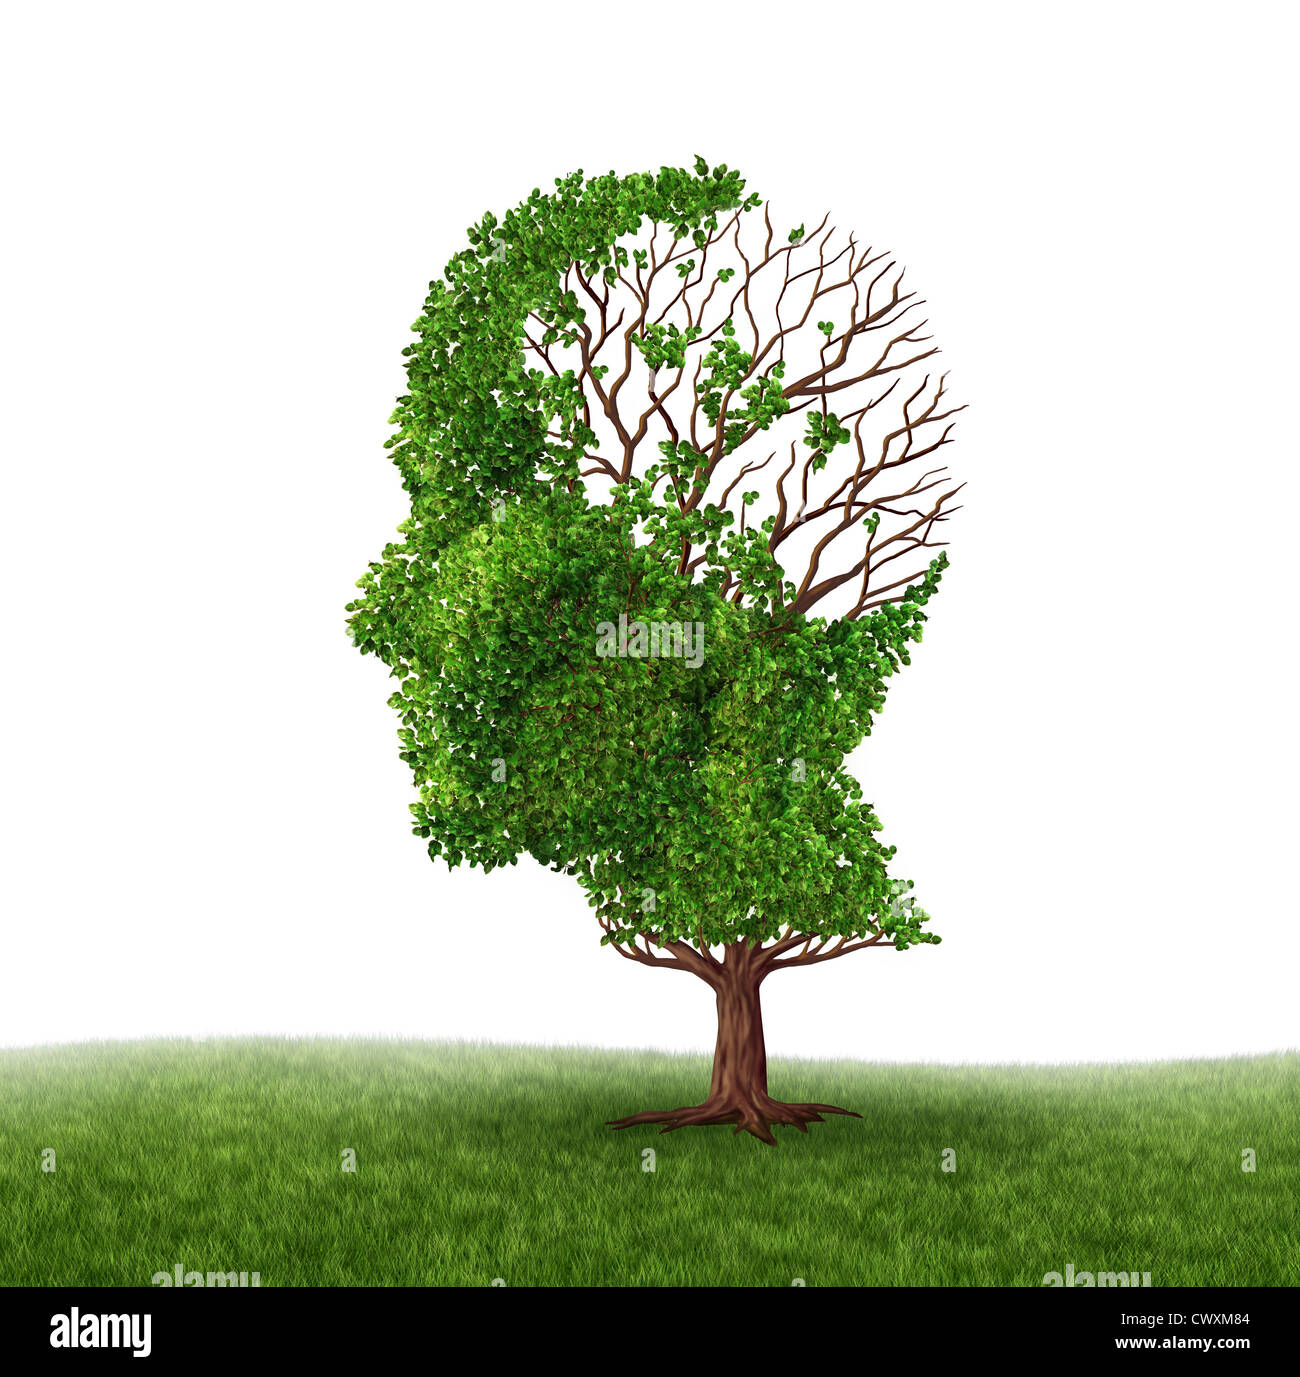 Brain function loss and dealing With dementia and Alzheimer's disease as a medical icon of a tree in the shape of a human head a Stock Photo